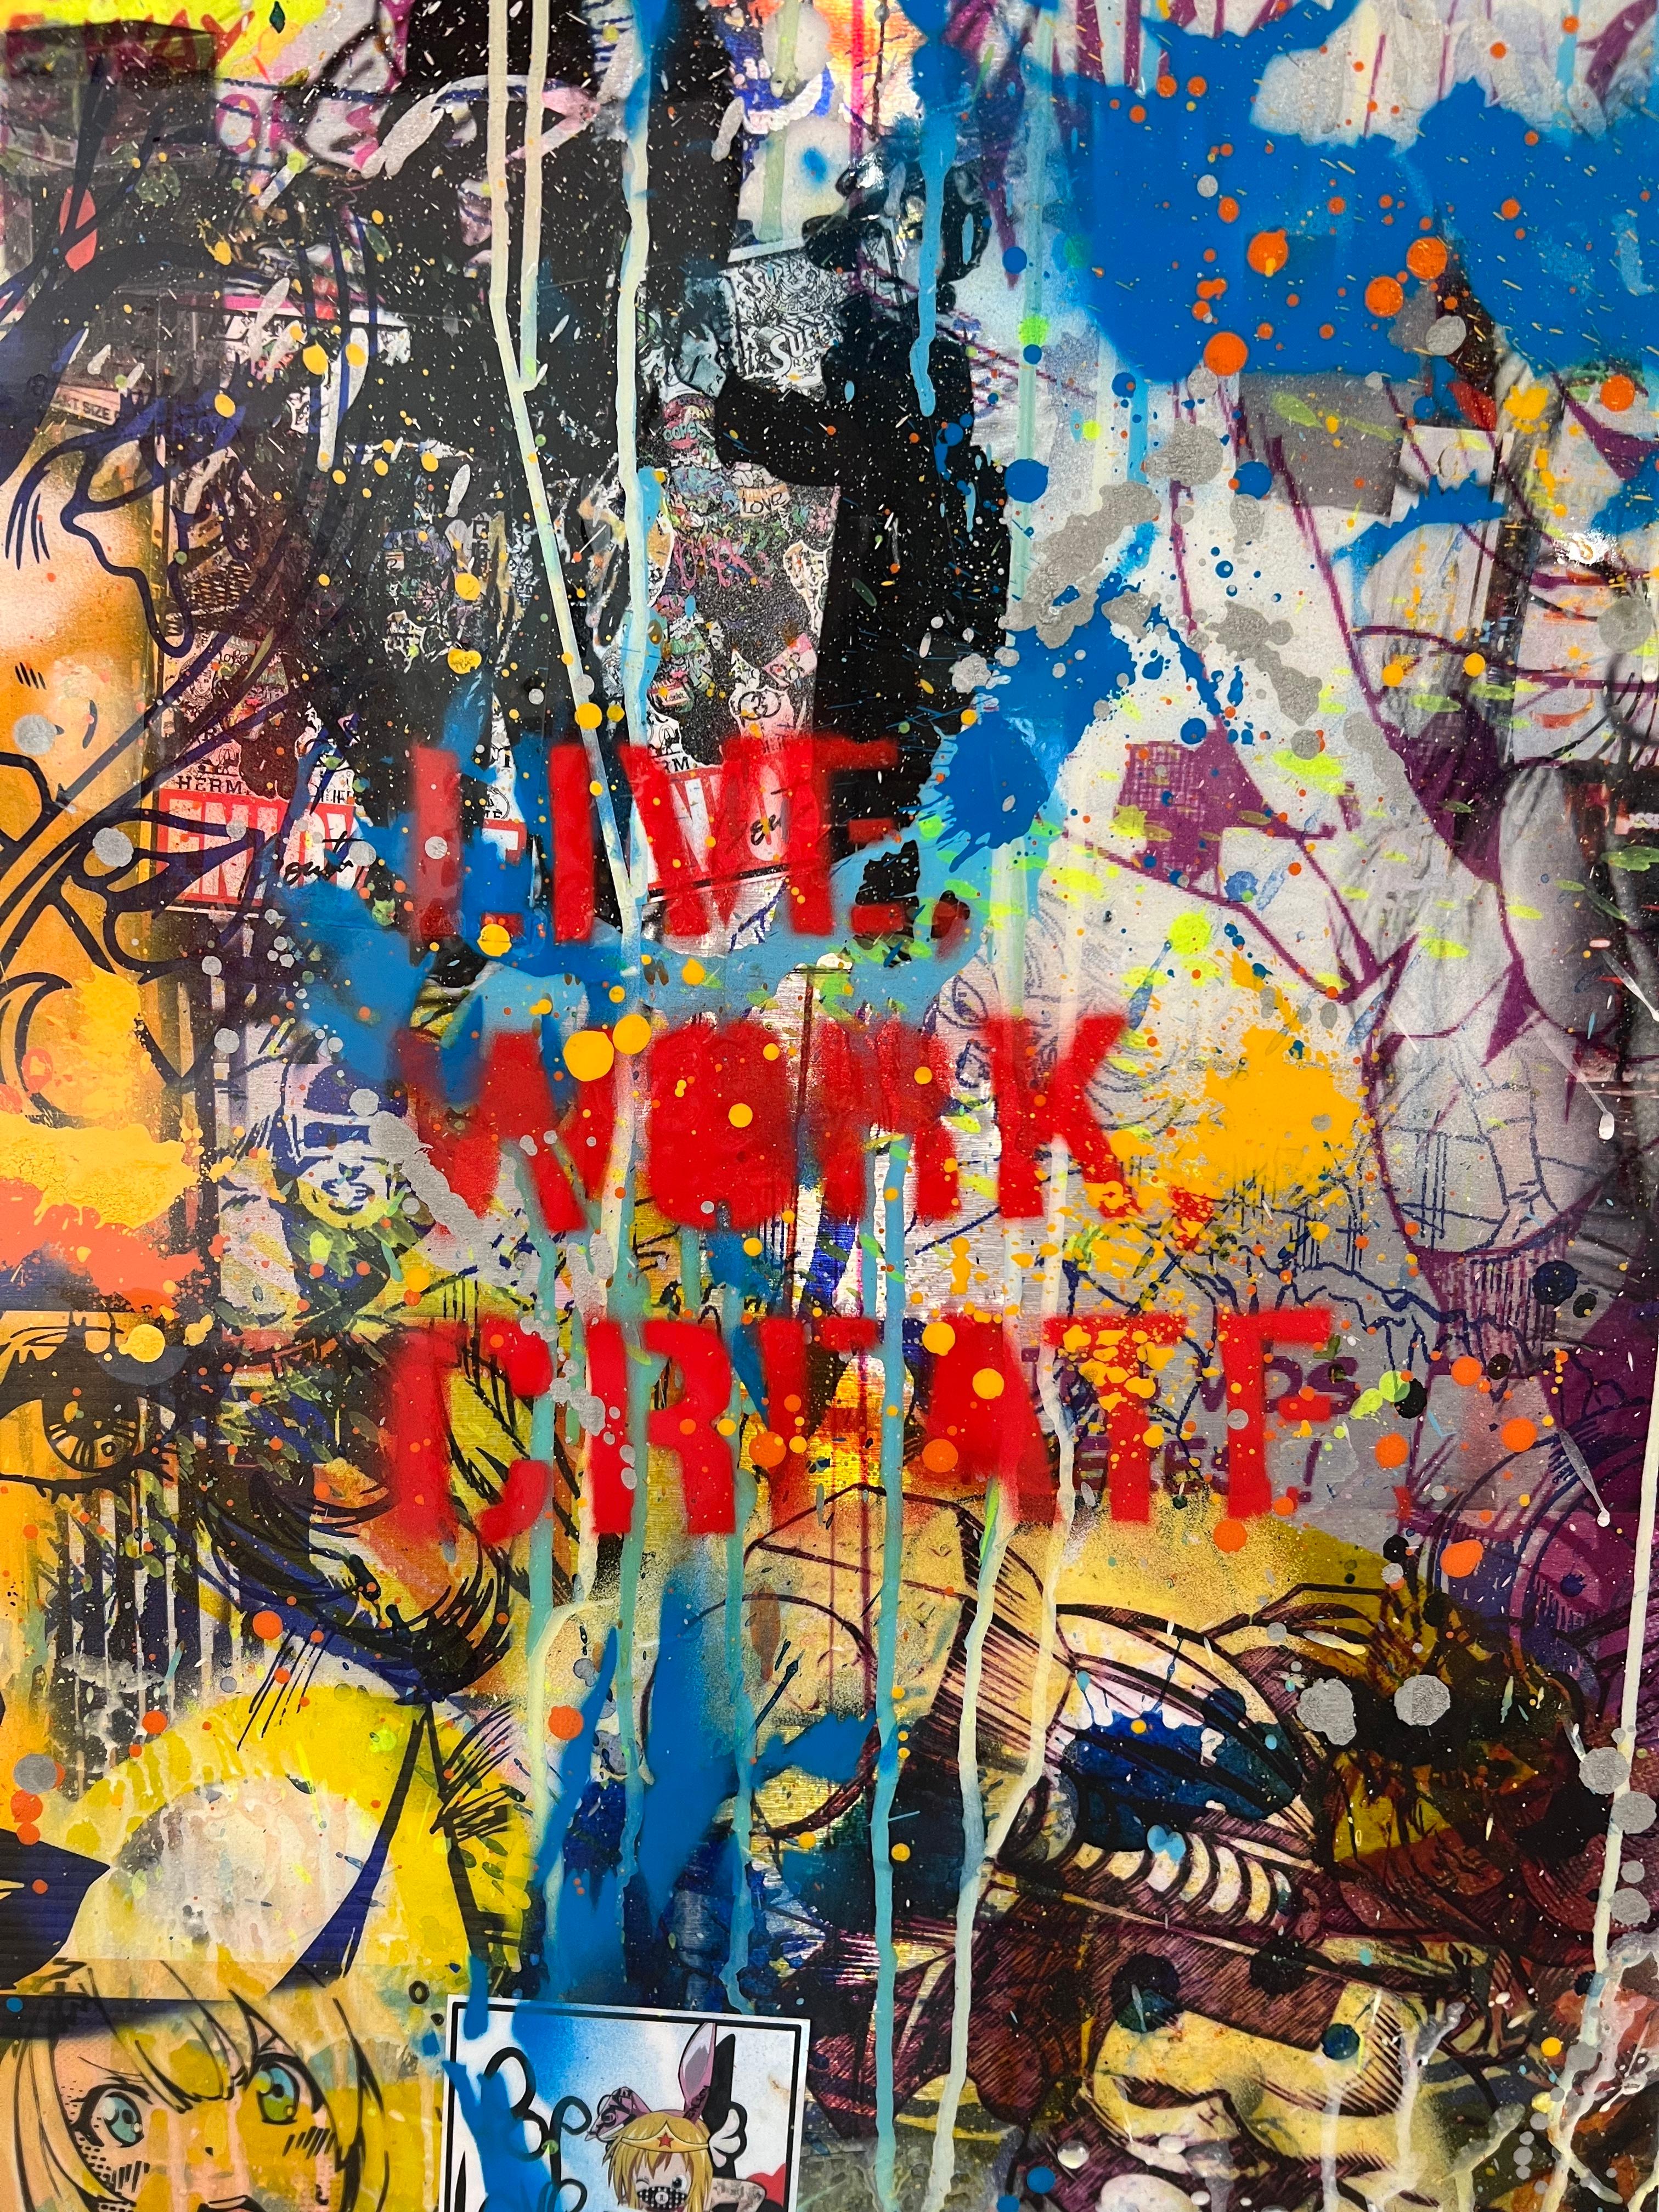 I'm Work Create - Painting by Cédric Bouteiller